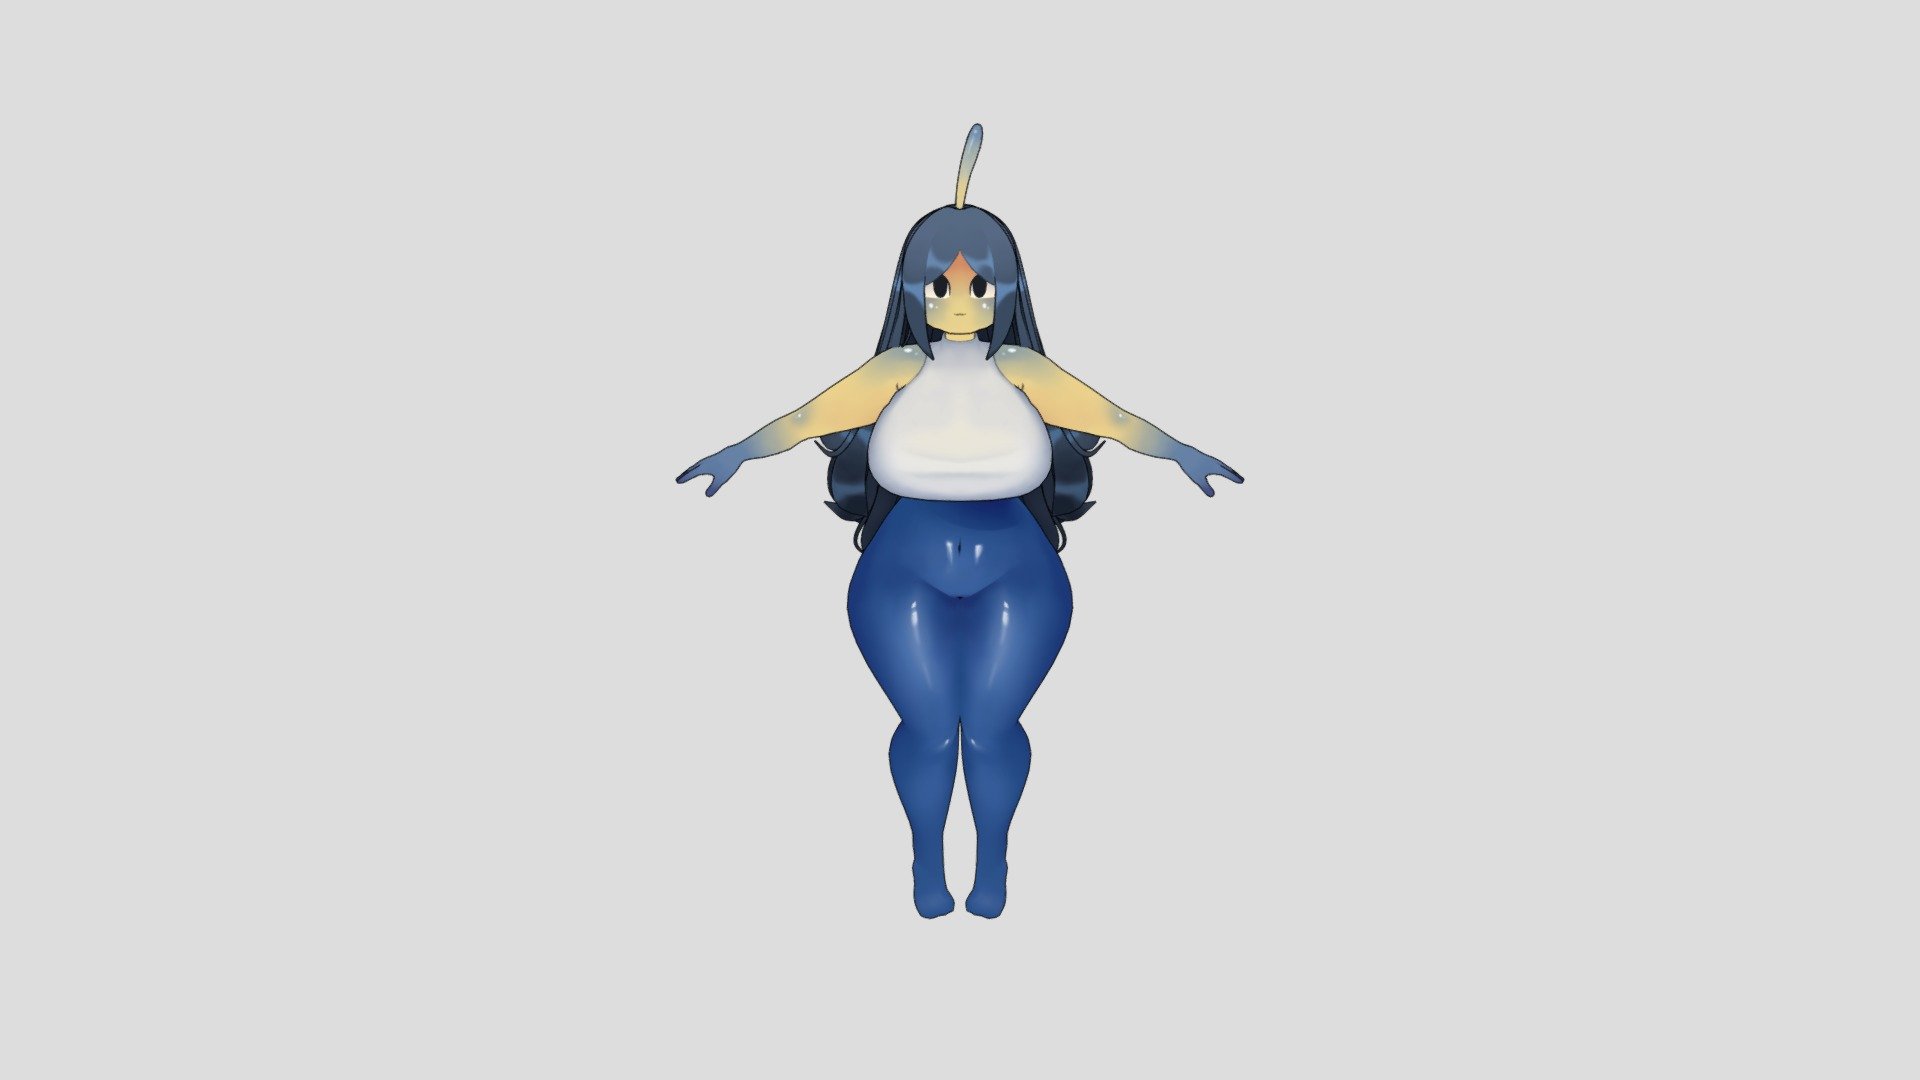 3D model commission for VRChat - Polse - 3D model by Carly.Simmons 3d model